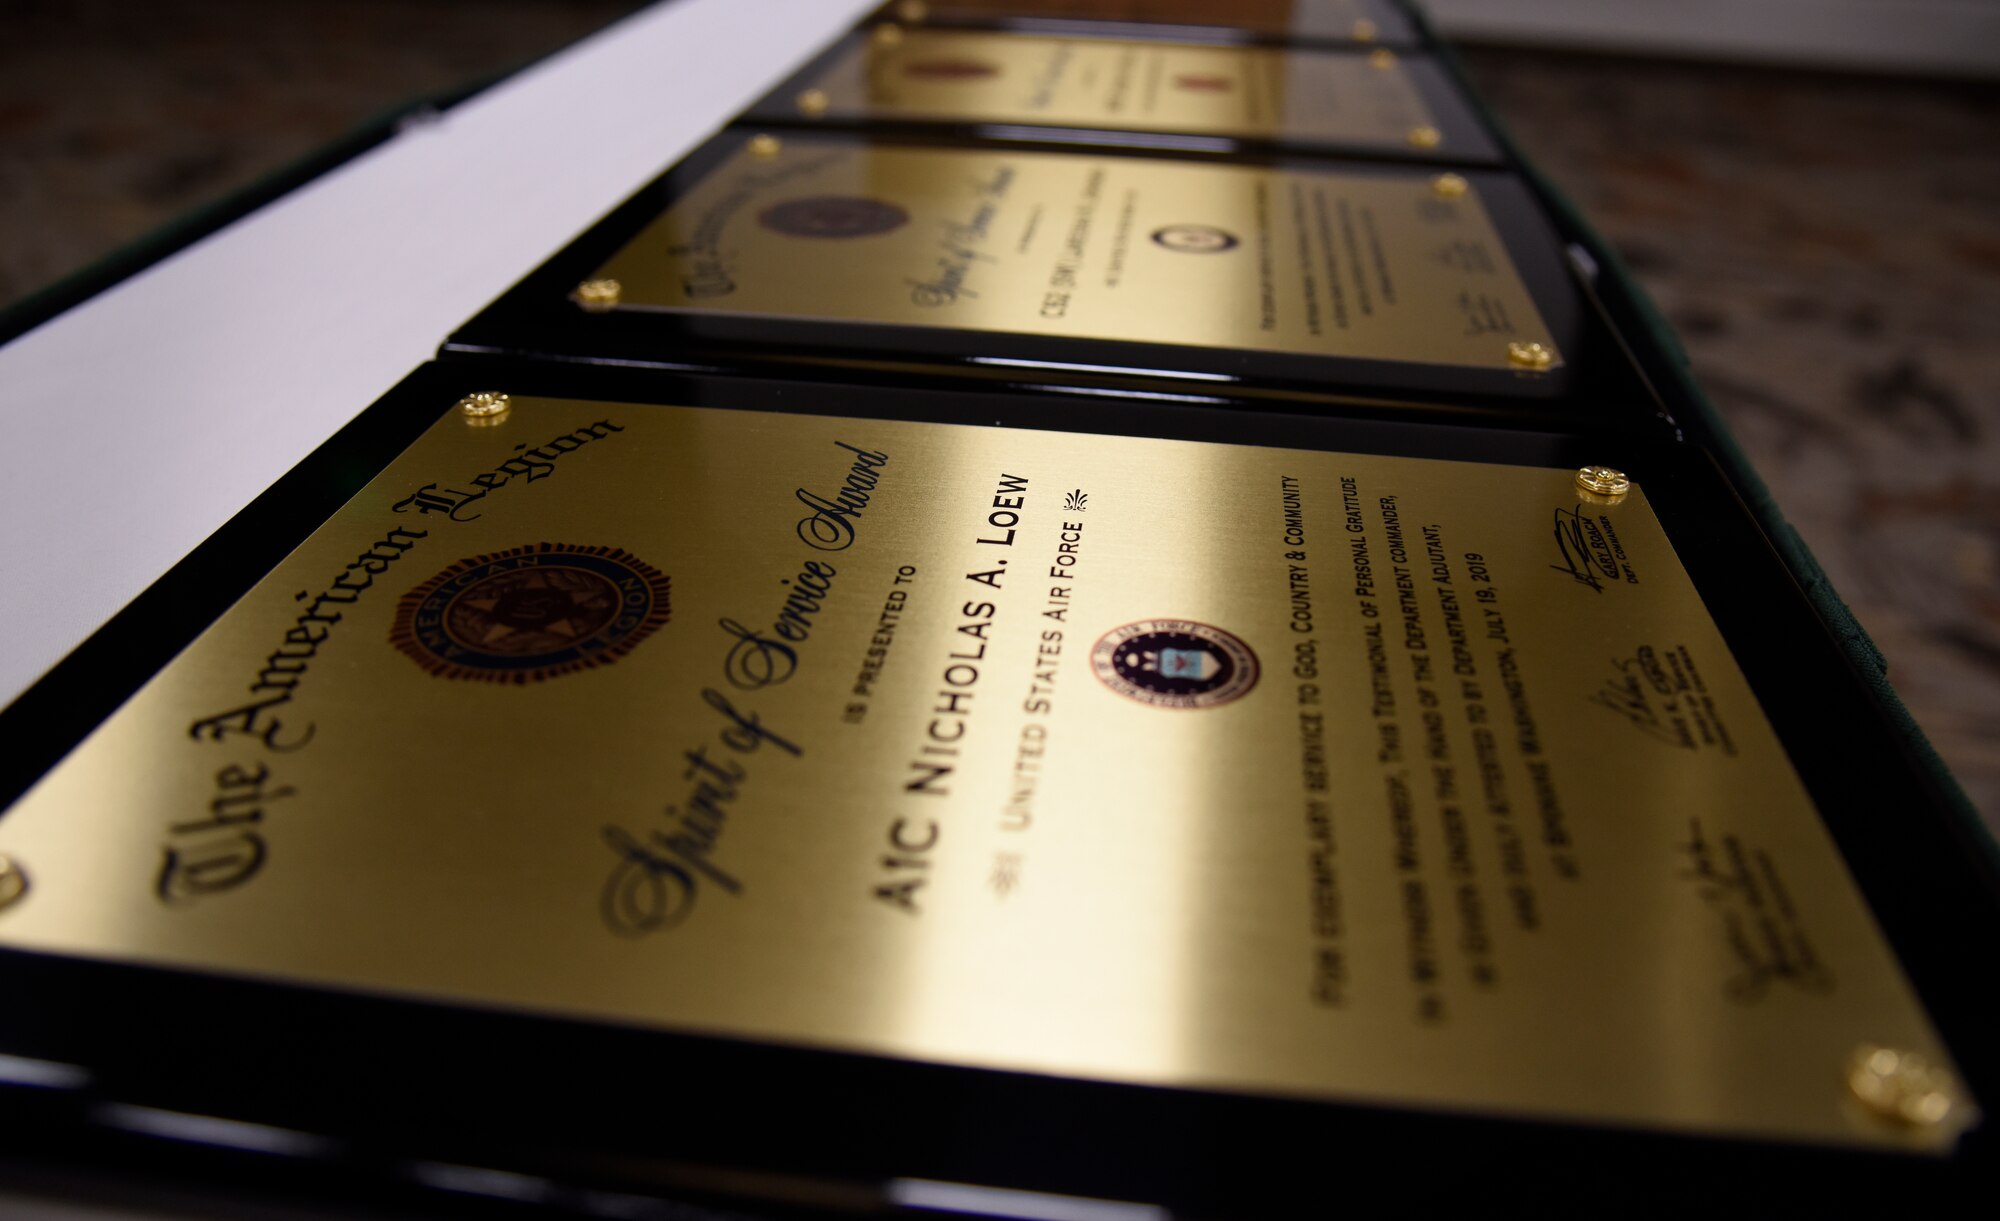 Spirit of Service Award plaques are displayed on a table during the annual American Legion Department Convention in Spokane, Washington, July 19, 2019. The Legion gives the Spirit of Service Awards annually to members from each branch who excel in their performance on-duty and are also actively involved in their local community. (U.S. Air Force photo by Senior Airman Jesenia Landaverde)